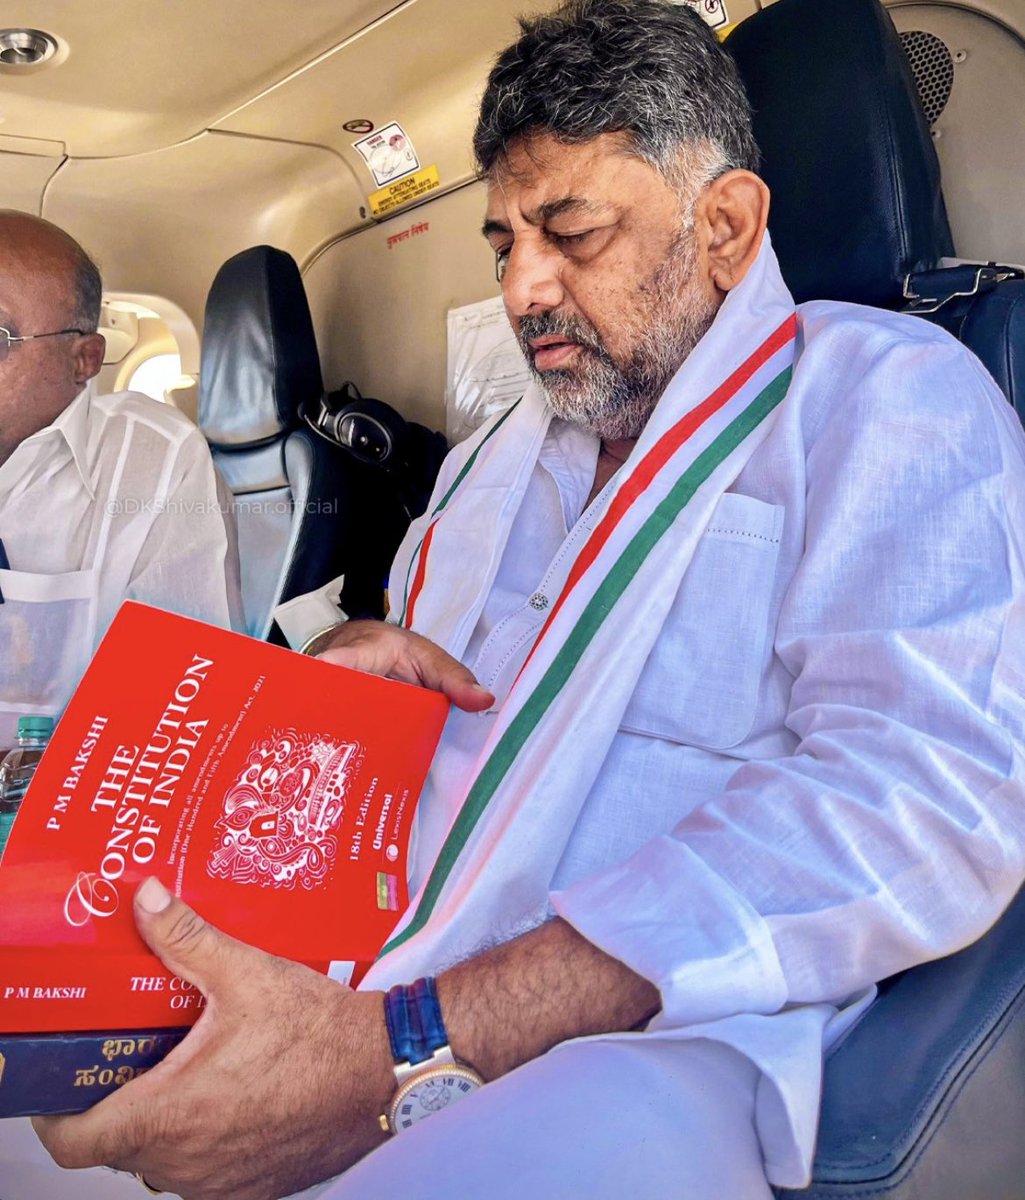 DK Shivakumar is the real Chanakya of Indian politics who is known as campaign machine⚡️

He has clicked this photo and making it viral giving  message that INC is fully committed to Protect the Constitution🔥

#RahulParBharosaHai  #blockout2024 #LokSabhaElections2024